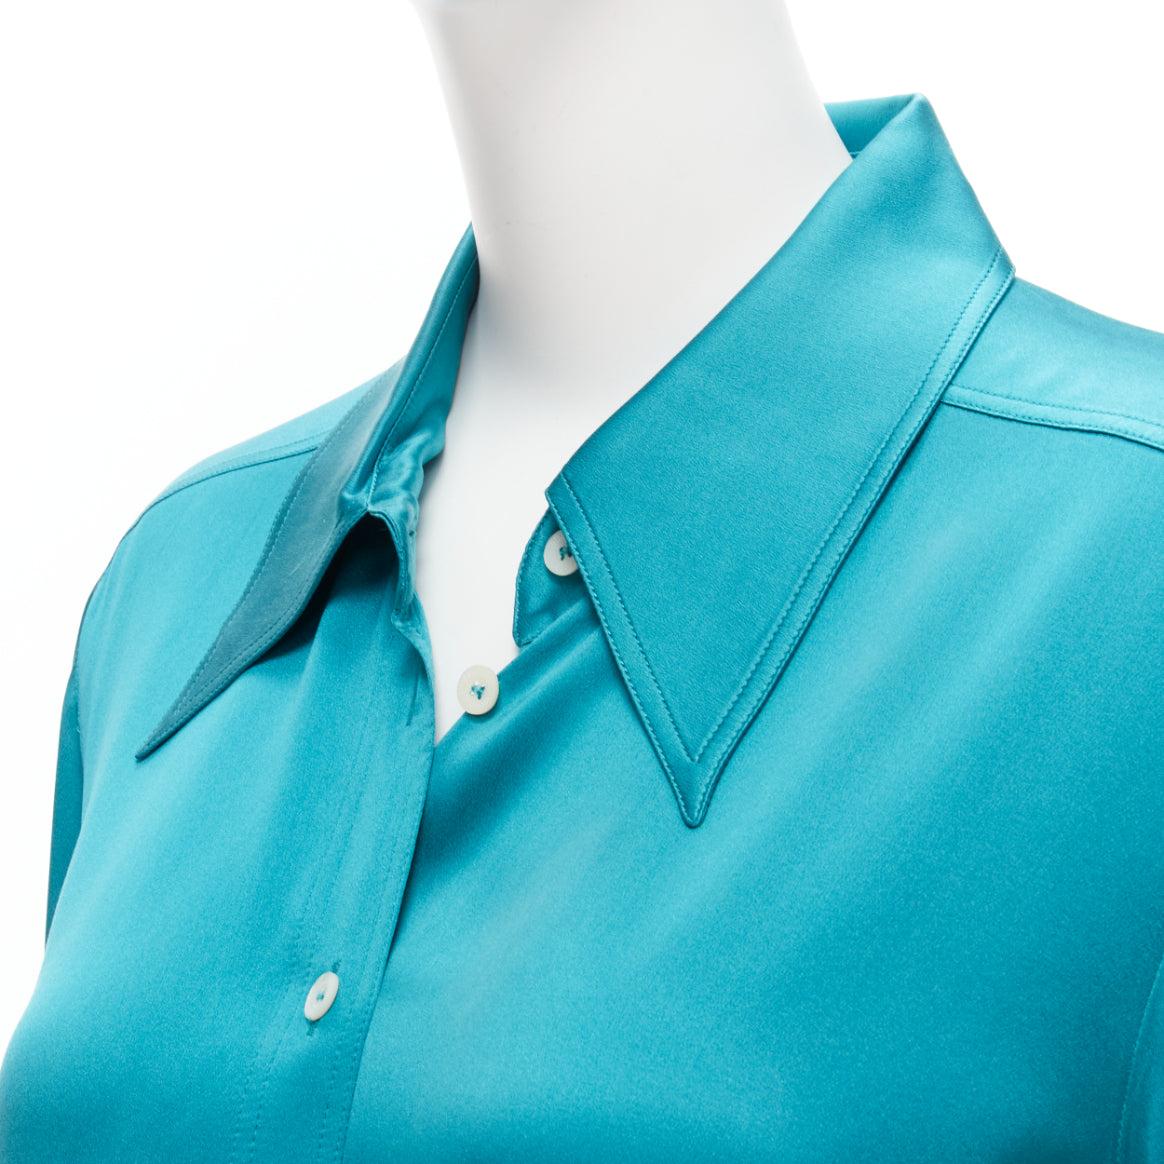 GUCCI Tom Ford 1995 Vintage teal blue silk blend long sleeve wide collar dress shirt IT46 XL Madonna
Reference: GIYG/A00343
Brand: Gucci
Designer: Tom Ford
Collection: 1995
As seen on: Similar style seen on Madonna
Material: Silk, Blend
Color: